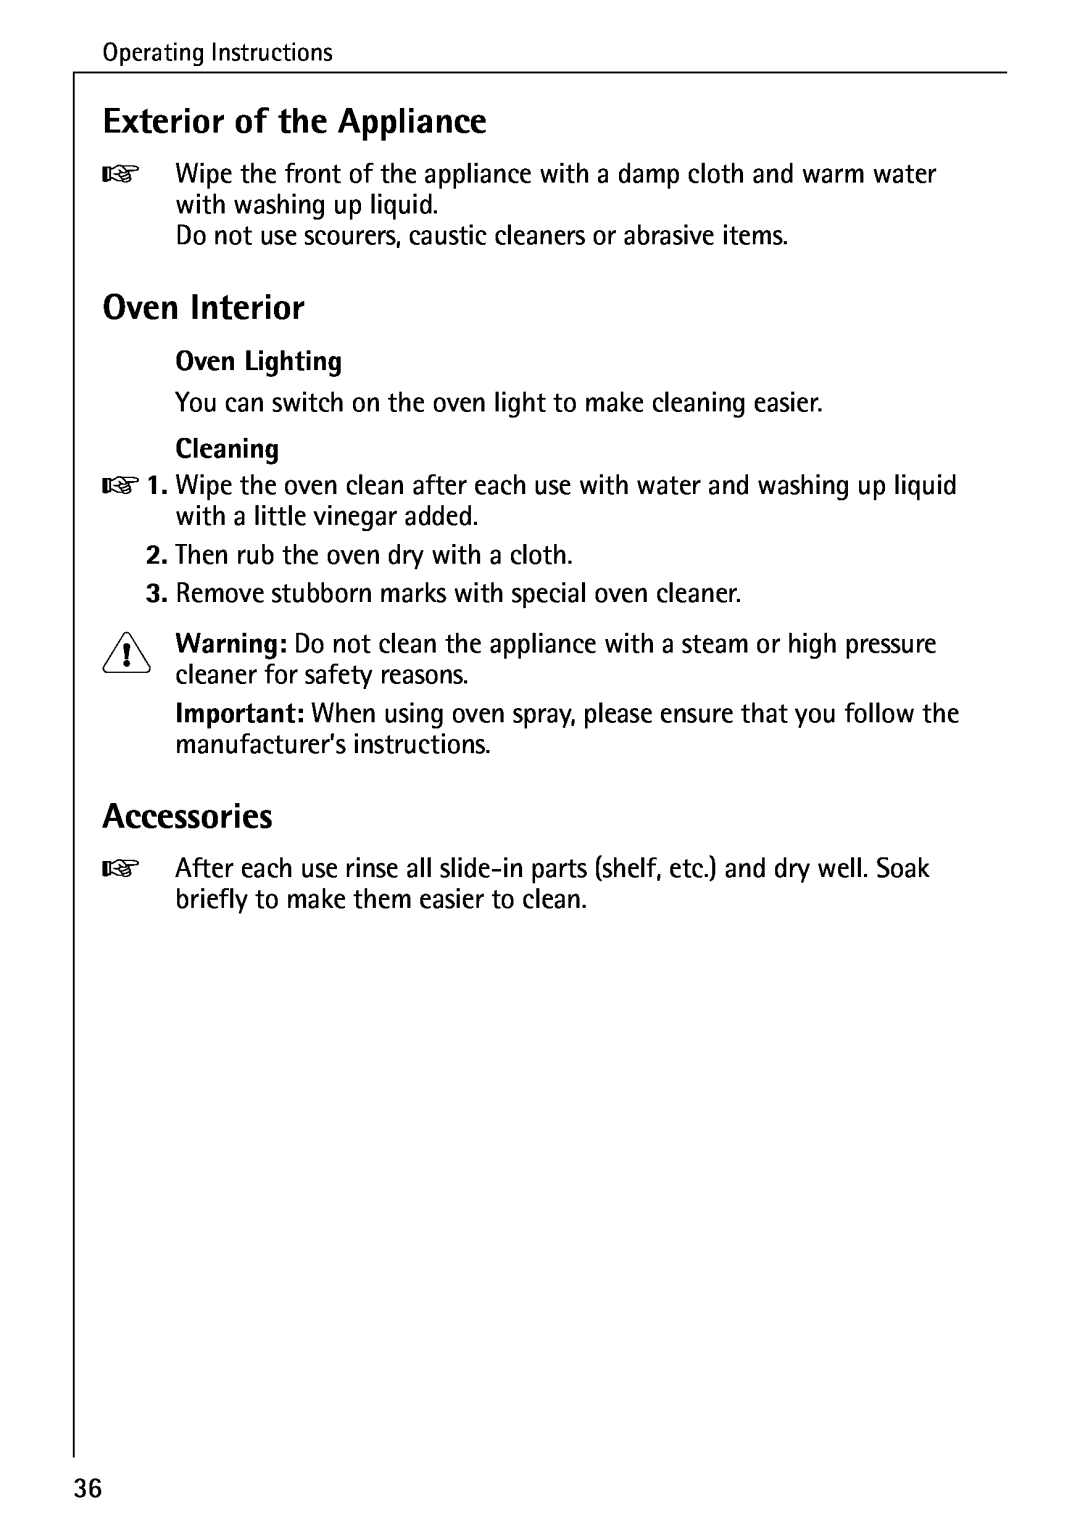 AEG 5033 V operating instructions Exterior of the Appliance, Oven Interior, Accessories, Oven Lighting, Cleaning 